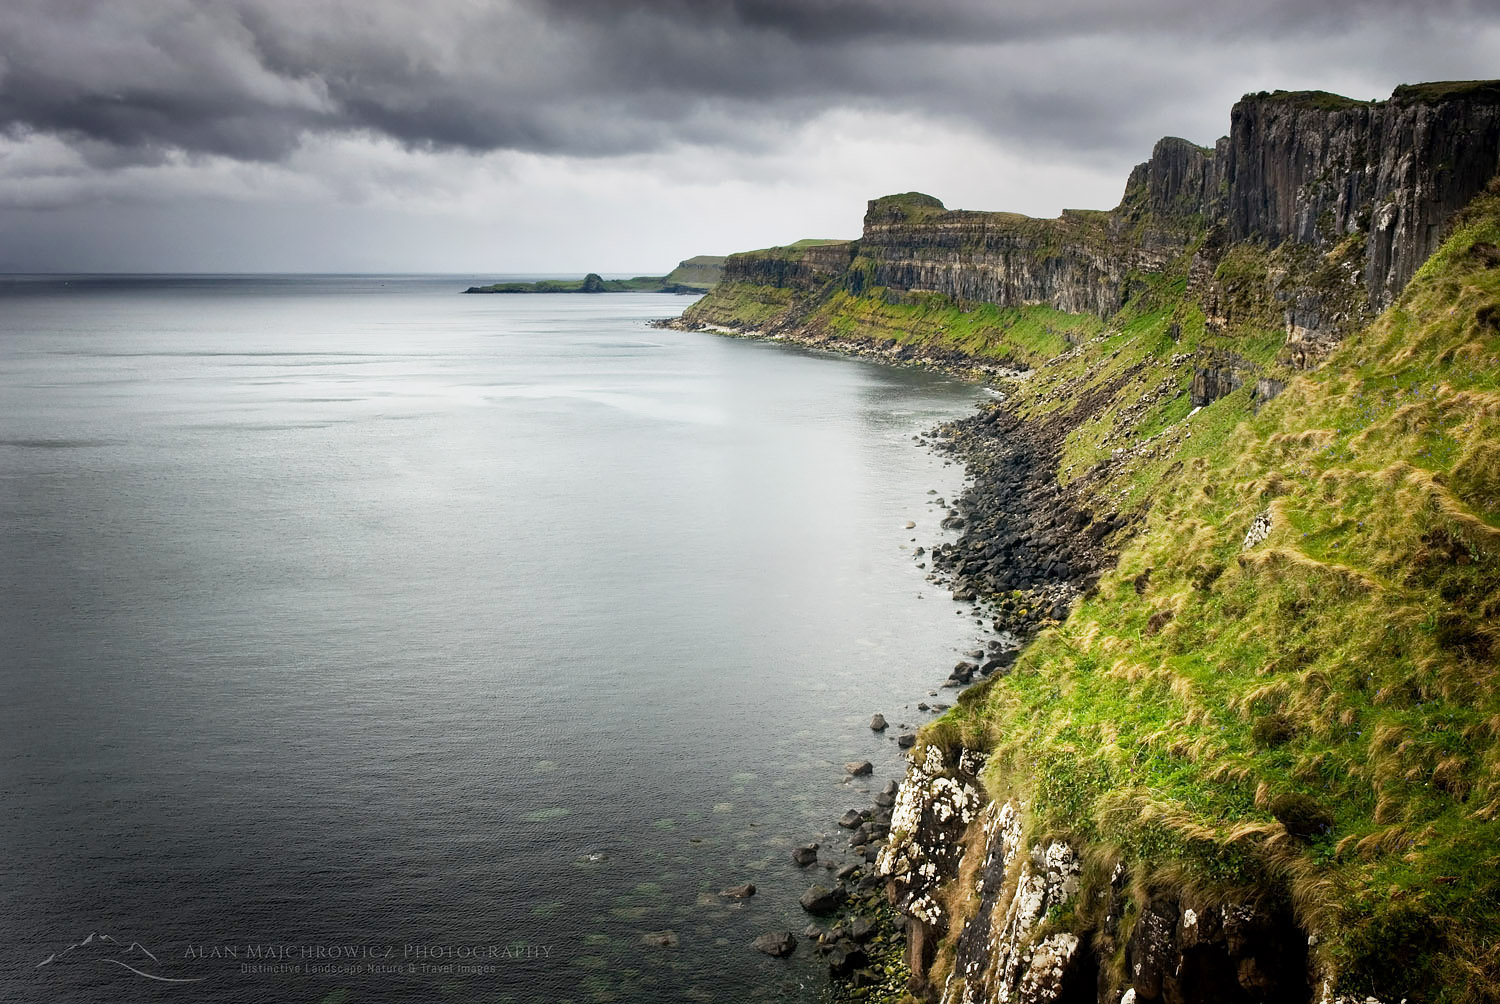 Dunite cliffs on the coast of Isle of Skye Scotland, Kilt Rock is in the distance #11807r